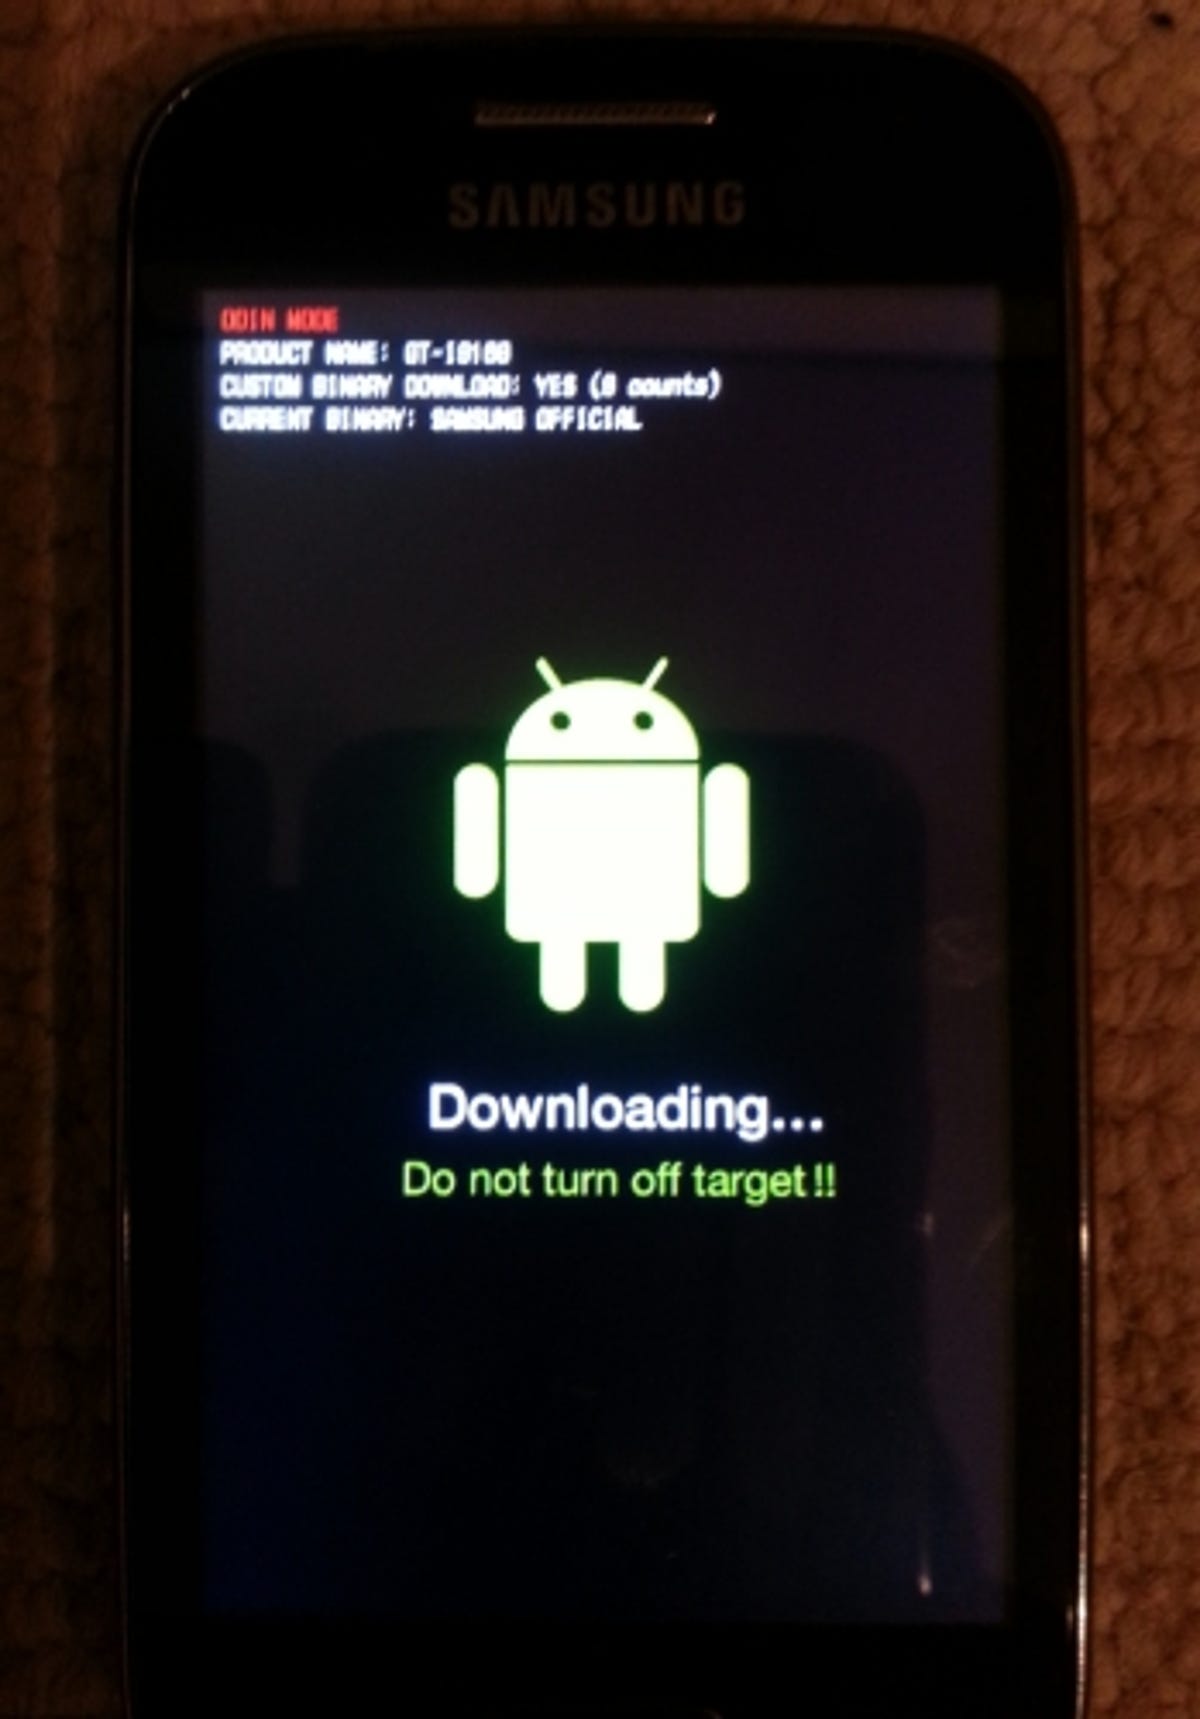 Samsung Galaxy Ace 2 downloading